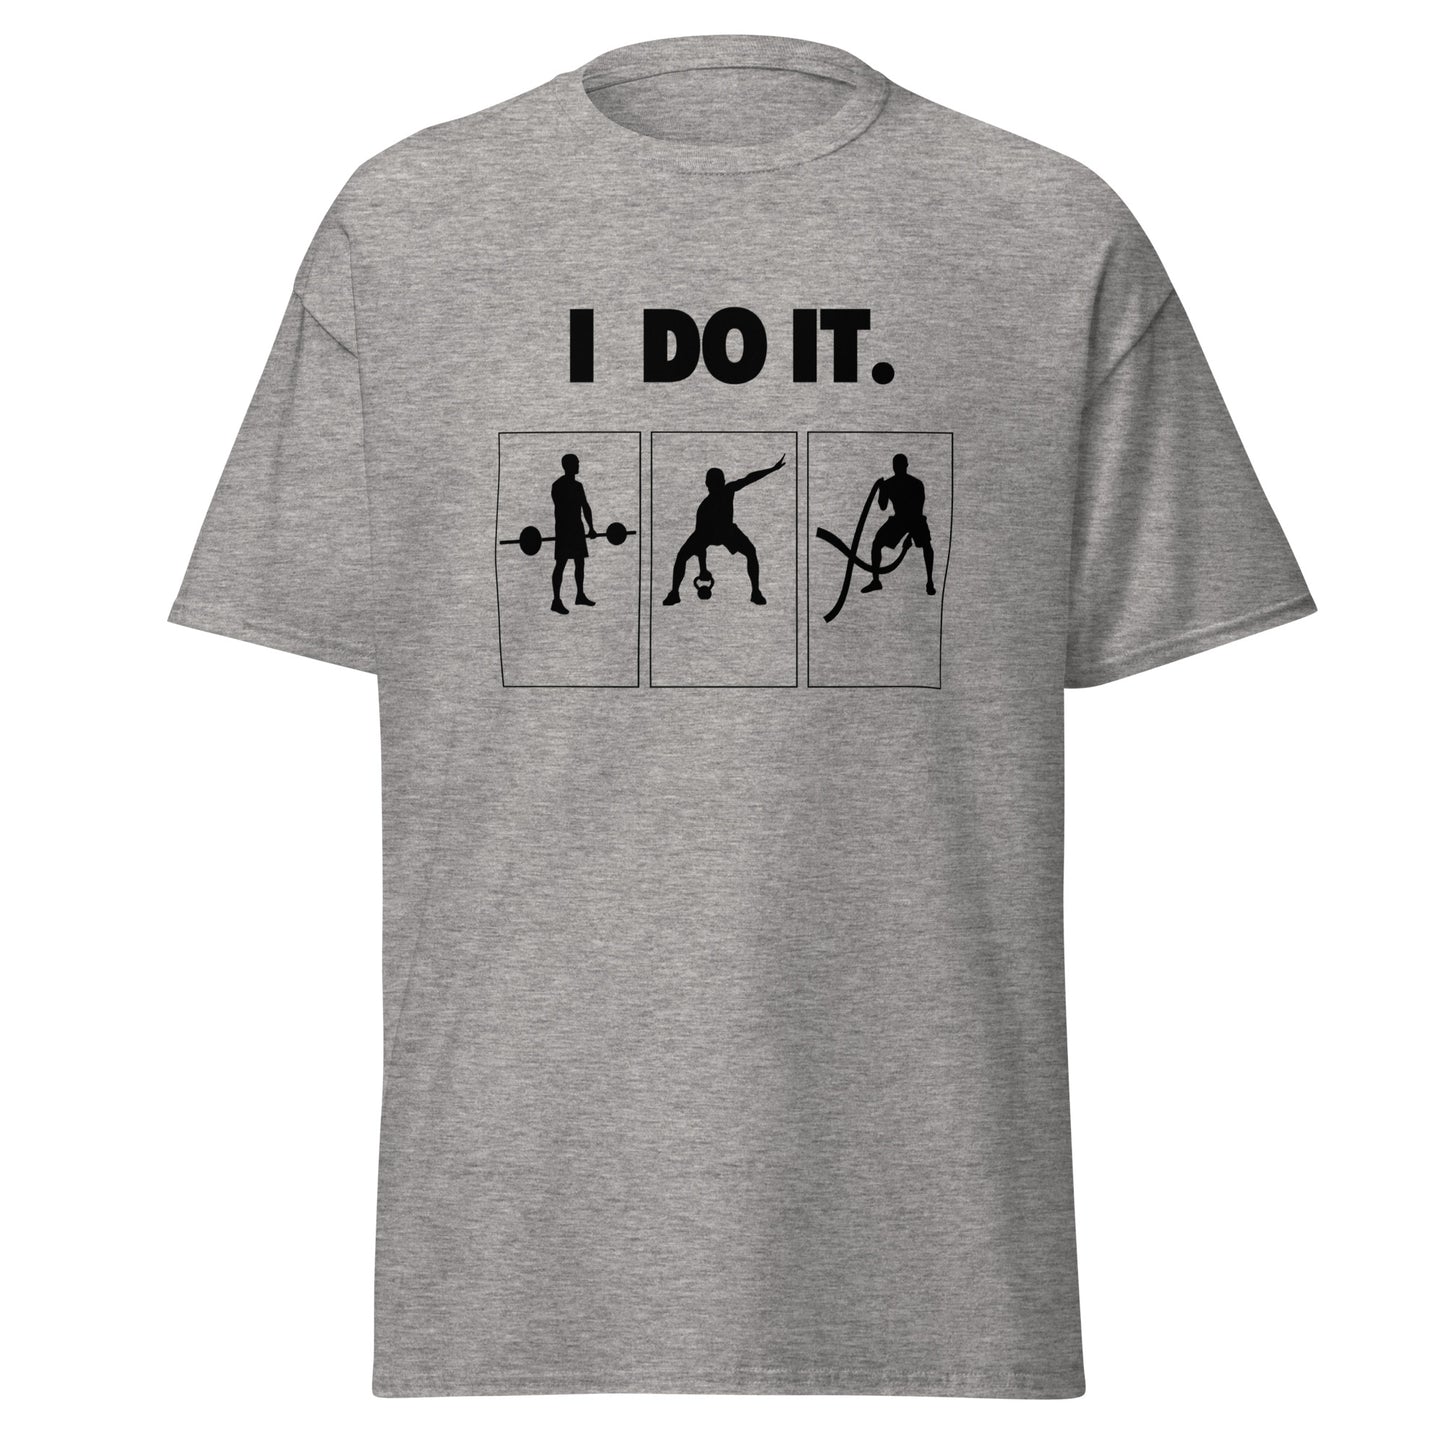 I DO IT. Men's Workout classic tee